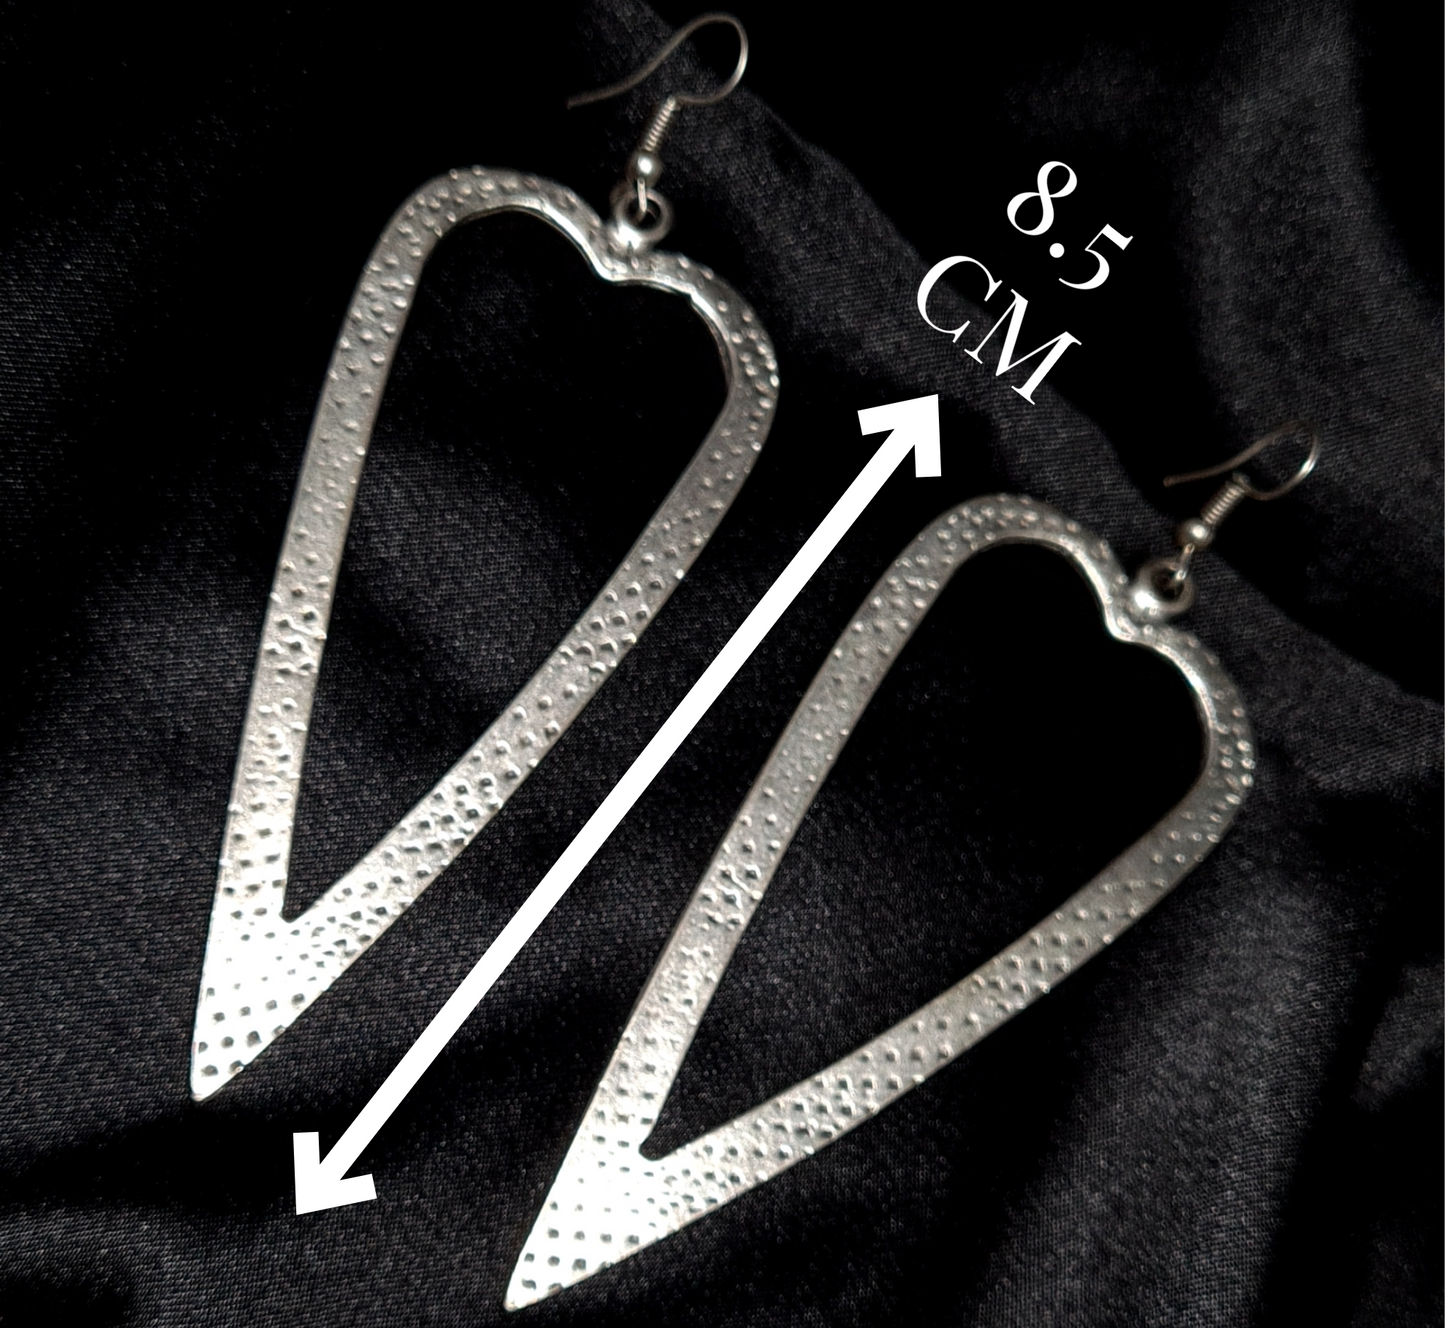 A pair of silver earrings in the shape of a heart on a black background. The earrings are small and delicate, and they have a shiny finish. The heart is smooth and has a rounded shape with measures